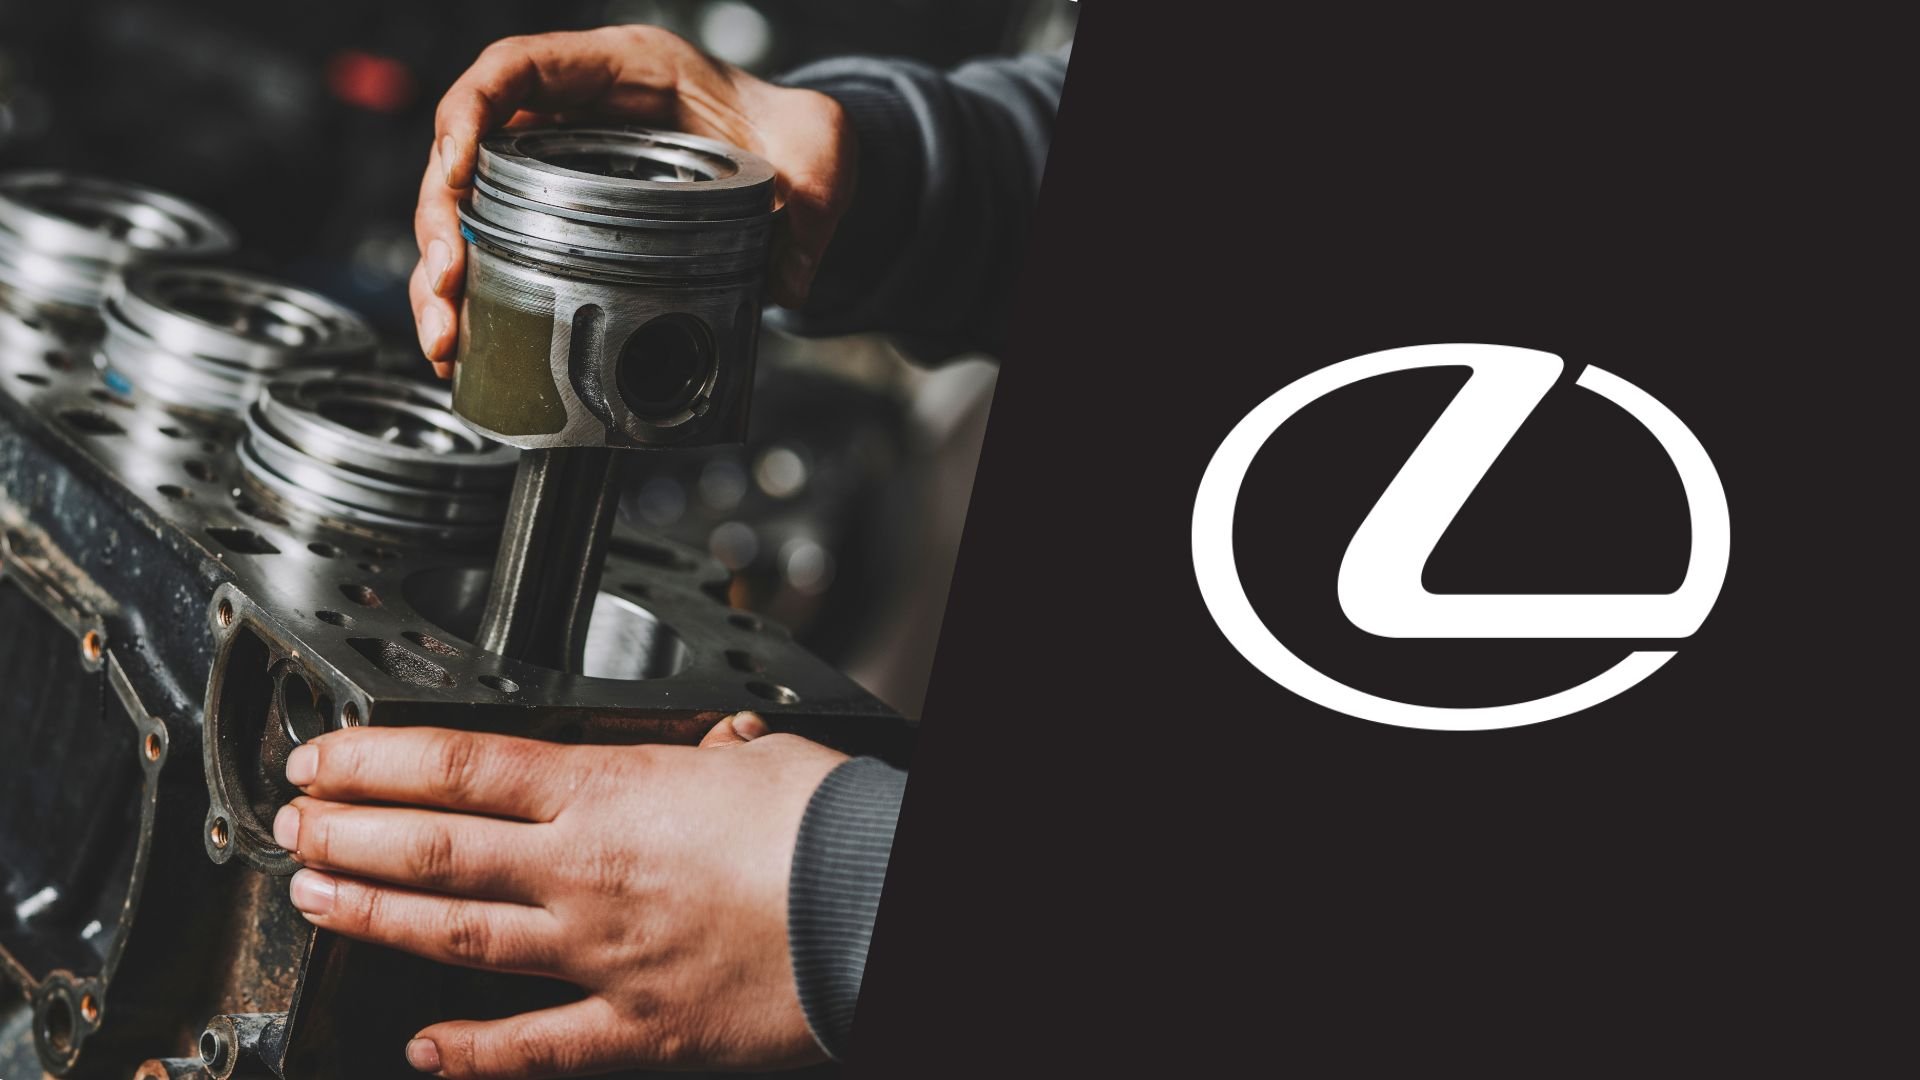 A man is working on a lexus engine.